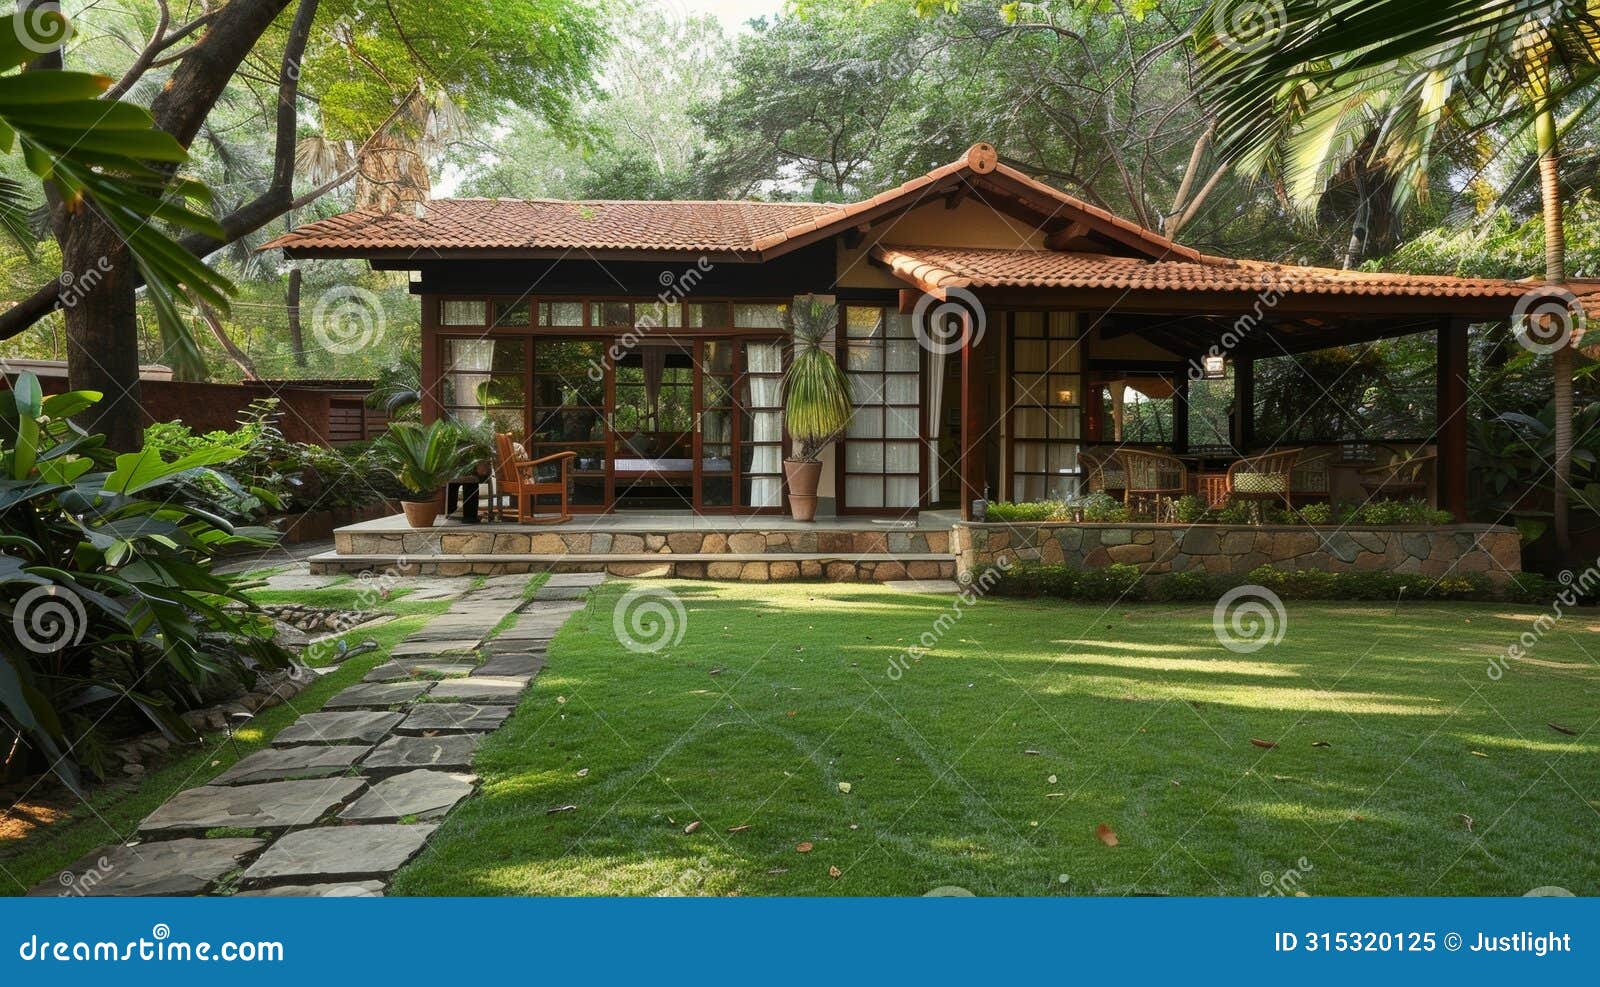 an idyllic bungalow nestled a the lush greenery offering the perfect escape for a restful slumber. 2d flat cartoon